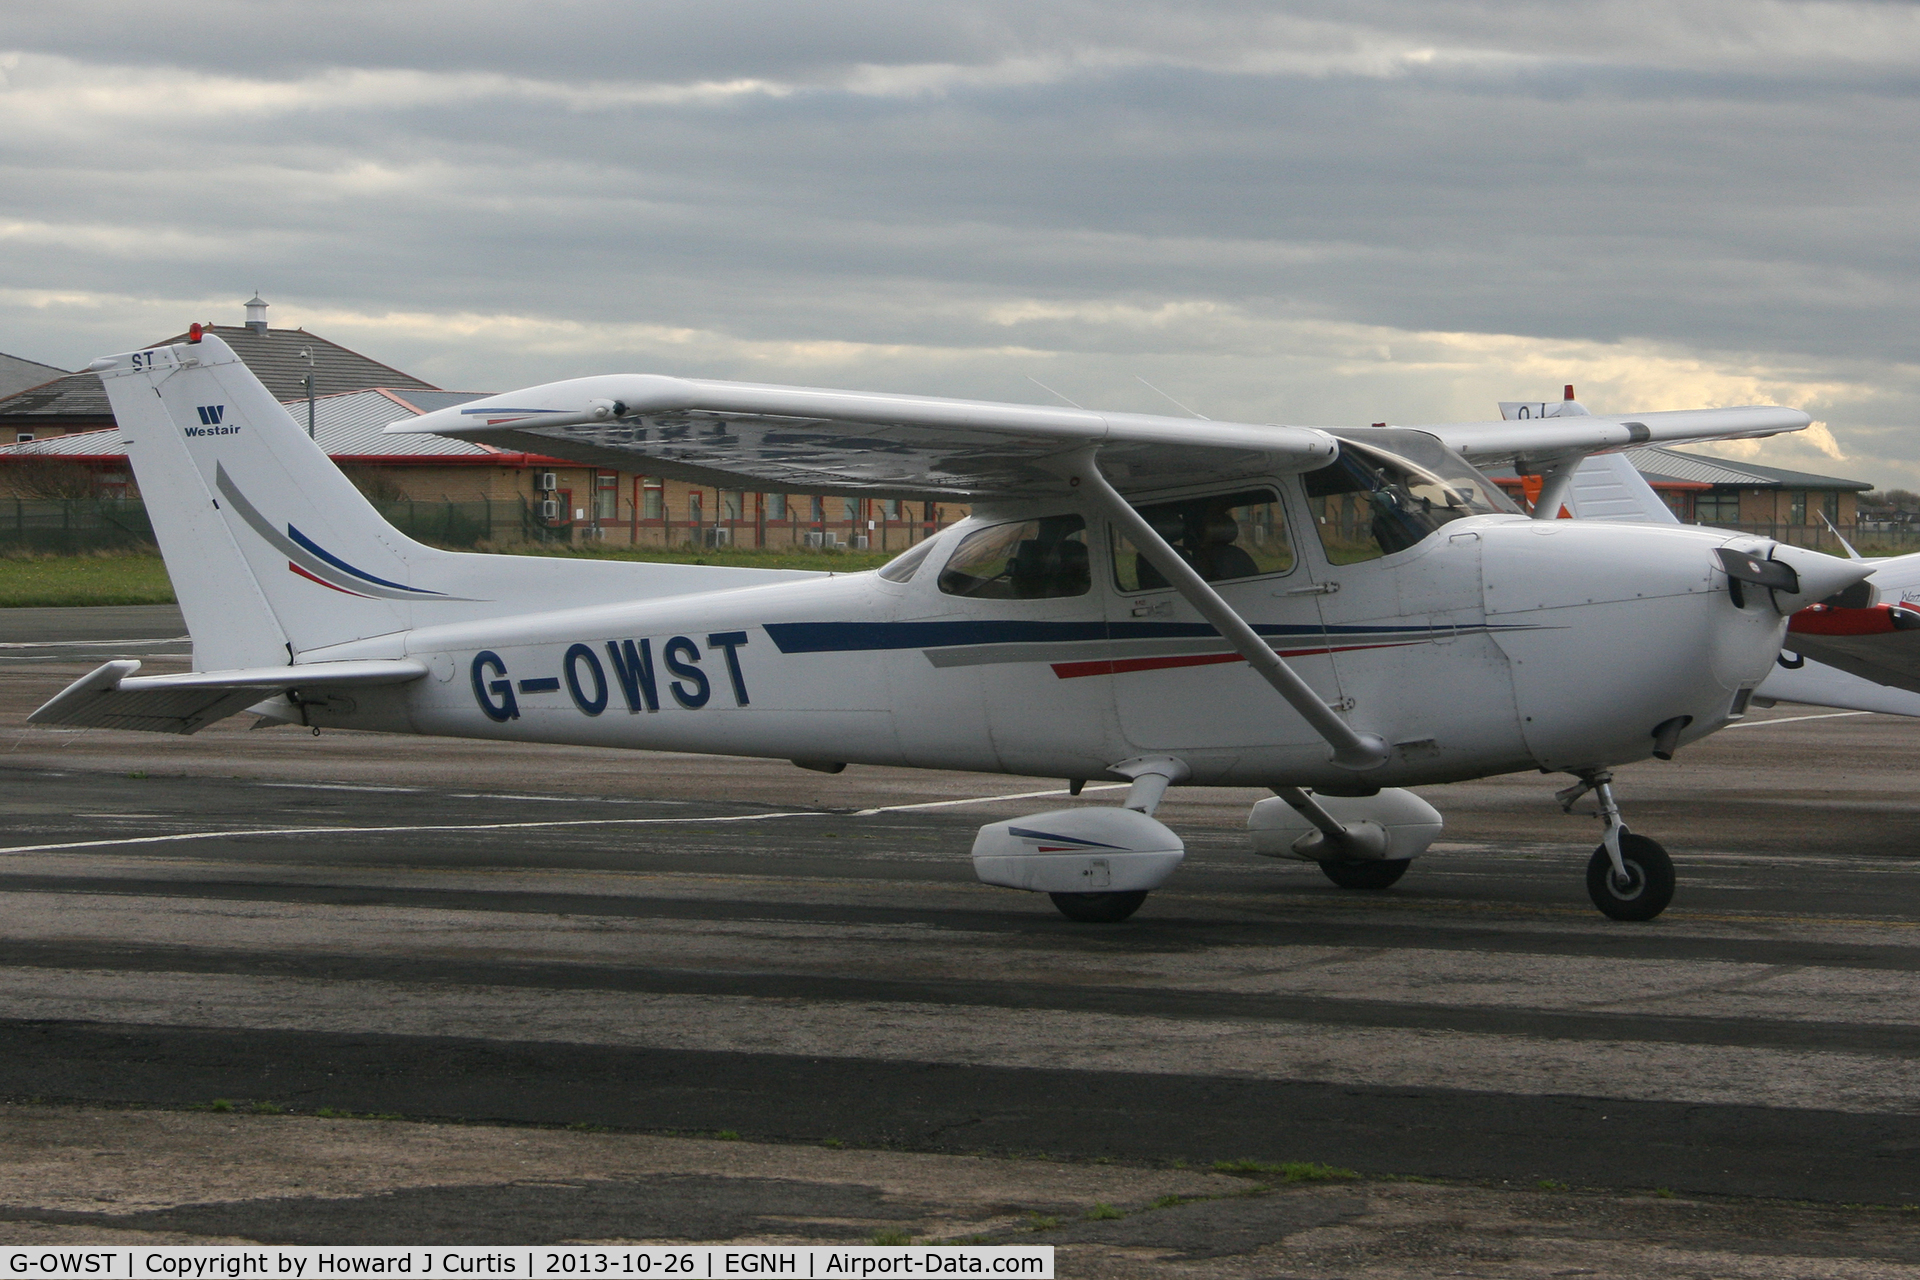 G-OWST, 1999 Cessna 172S C/N 172S-8163, Privately owned, a resident here.